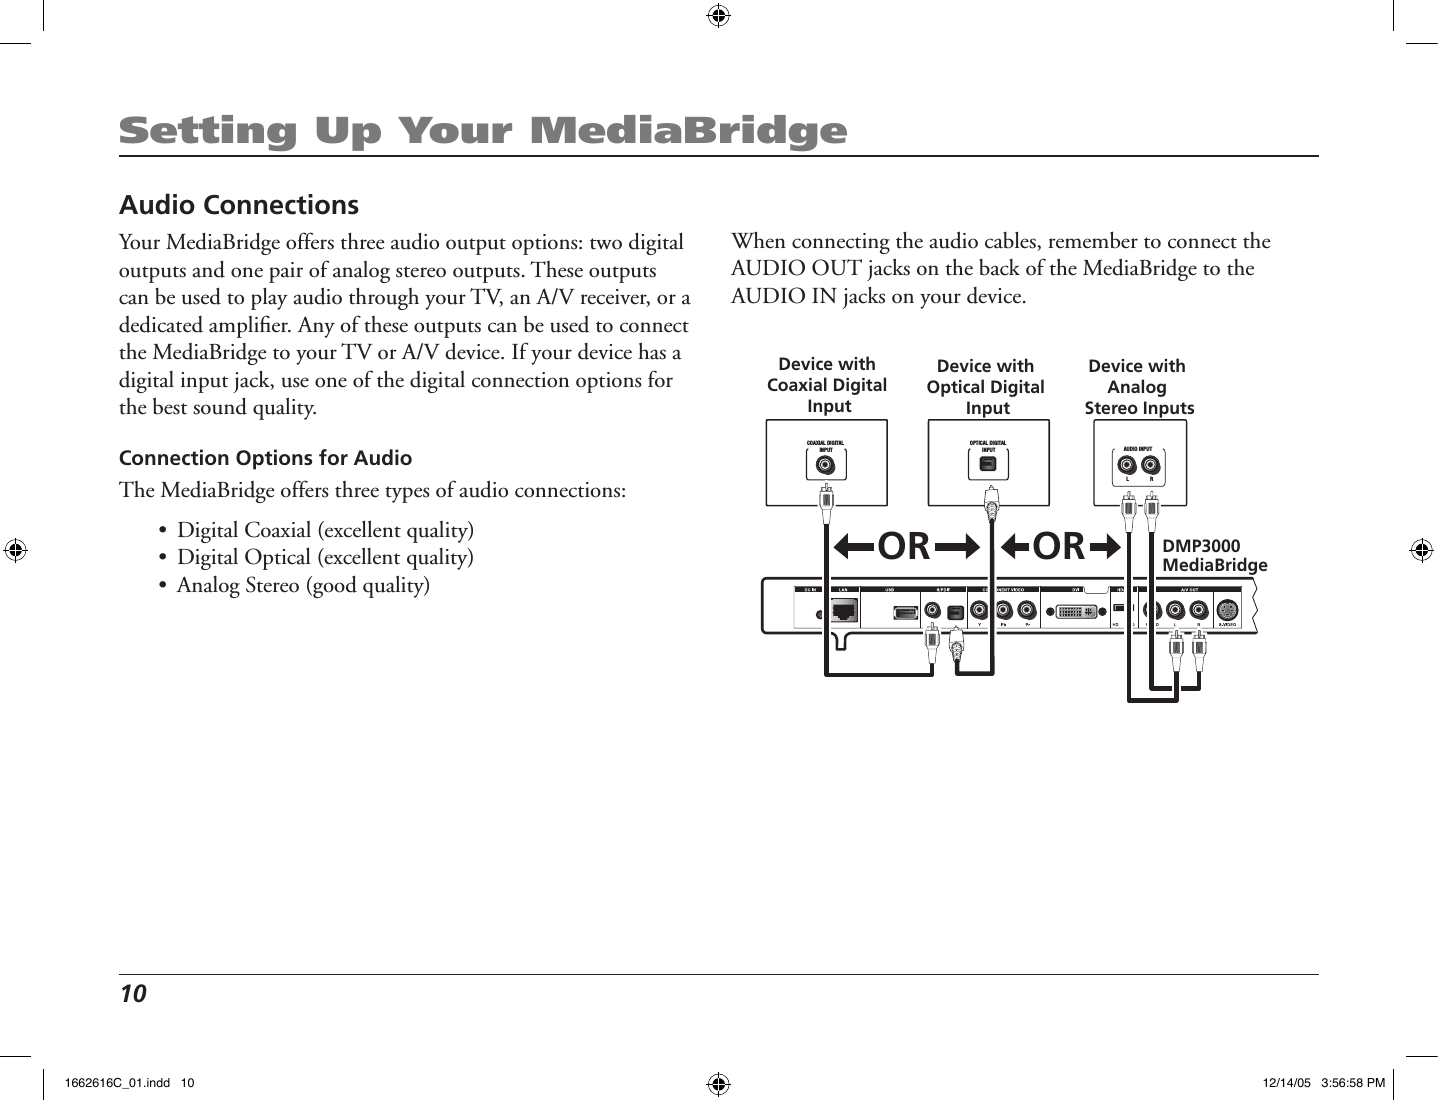 10 Setting Up Your MediaBridgeAudio ConnectionsYour MediaBridge offers three audio output options: two digital outputs and one pair of analog stereo outputs. These outputs can be used to play audio through your TV, an A/V receiver, or a dedicated ampliﬁer. Any of these outputs can be used to connect the MediaBridge to your TV or A/V device. If your device has a digital input jack, use one of the digital connection options for the best sound quality.Connection Options for AudioThe MediaBridge offers three types of audio connections:•  Digital Coaxial (excellent quality)•  Digital Optical (excellent quality)•  Analog Stereo (good quality)DMP3000 MediaBridgeL                RAUDIO INPUTCOAXIAL DIGITAL INPUTDevice with Coaxial Digital InputOPTICAL DIGITAL INPUTDevice with Optical Digital InputDevice with Analog Stereo InputsORORWhen connecting the audio cables, remember to connect the AUDIO OUT jacks on the back of the MediaBridge to the AUDIO IN jacks on your device.1662616C_01.indd   10 12/14/05   3:56:58 PM